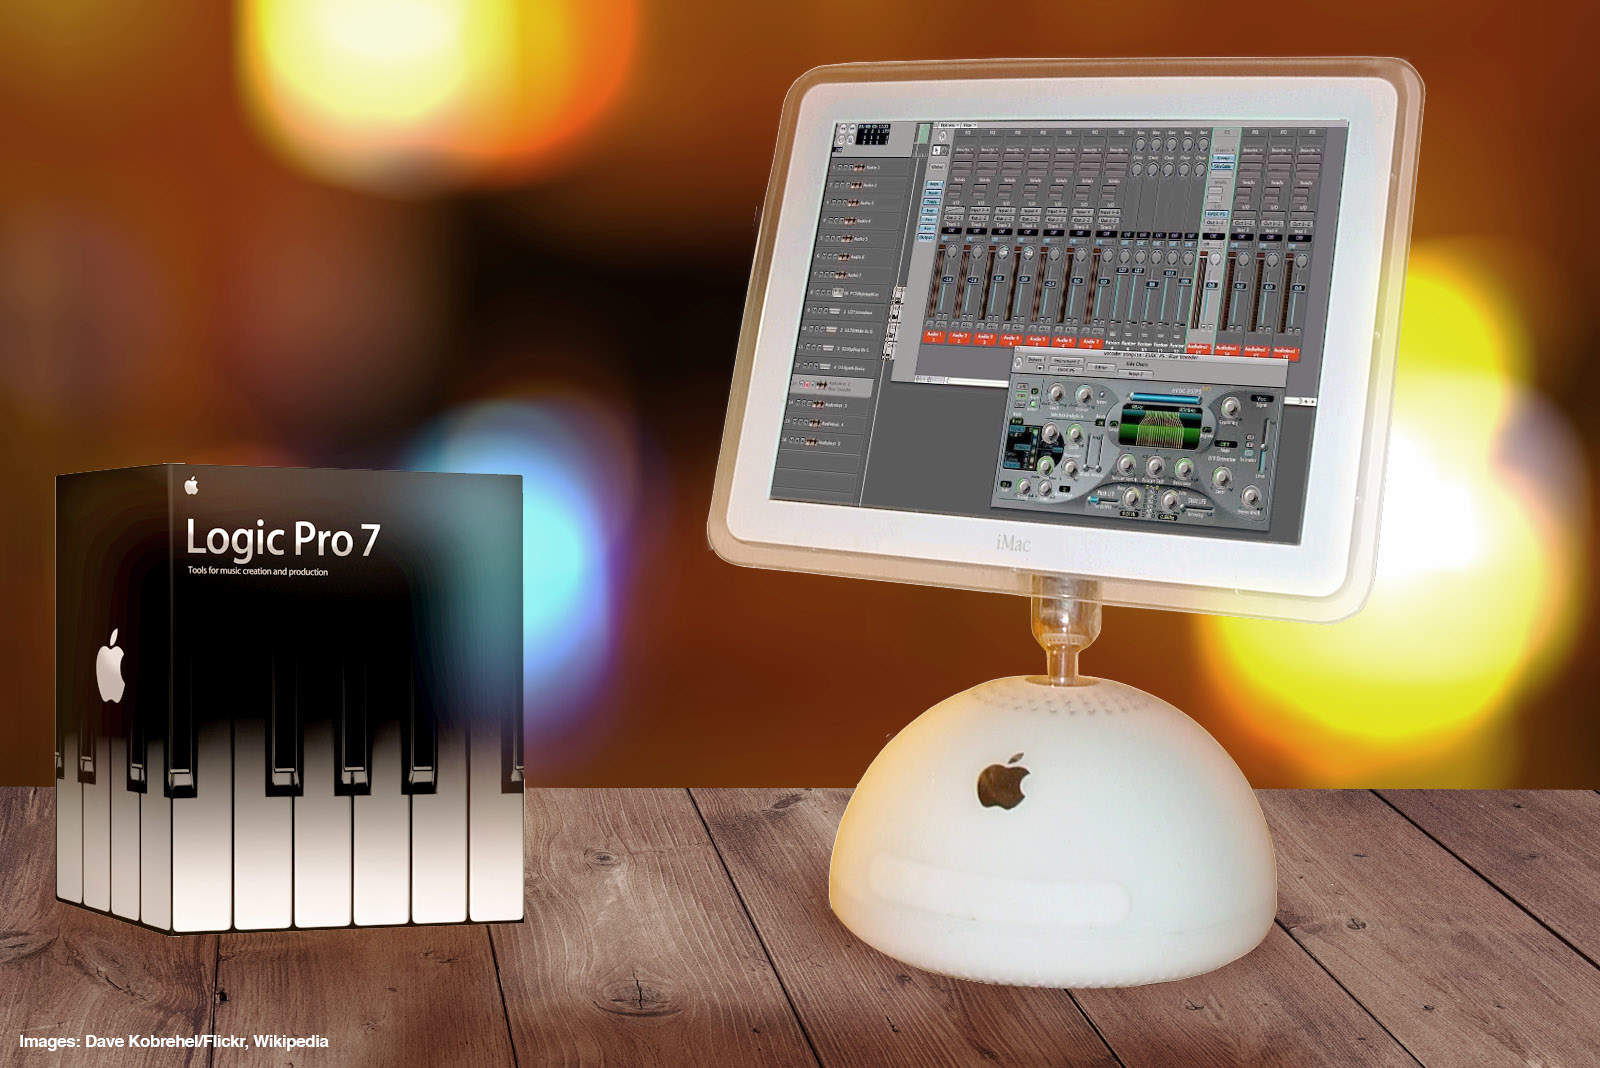 Logic Pro 7 was a great music creation tool for Apple fans.